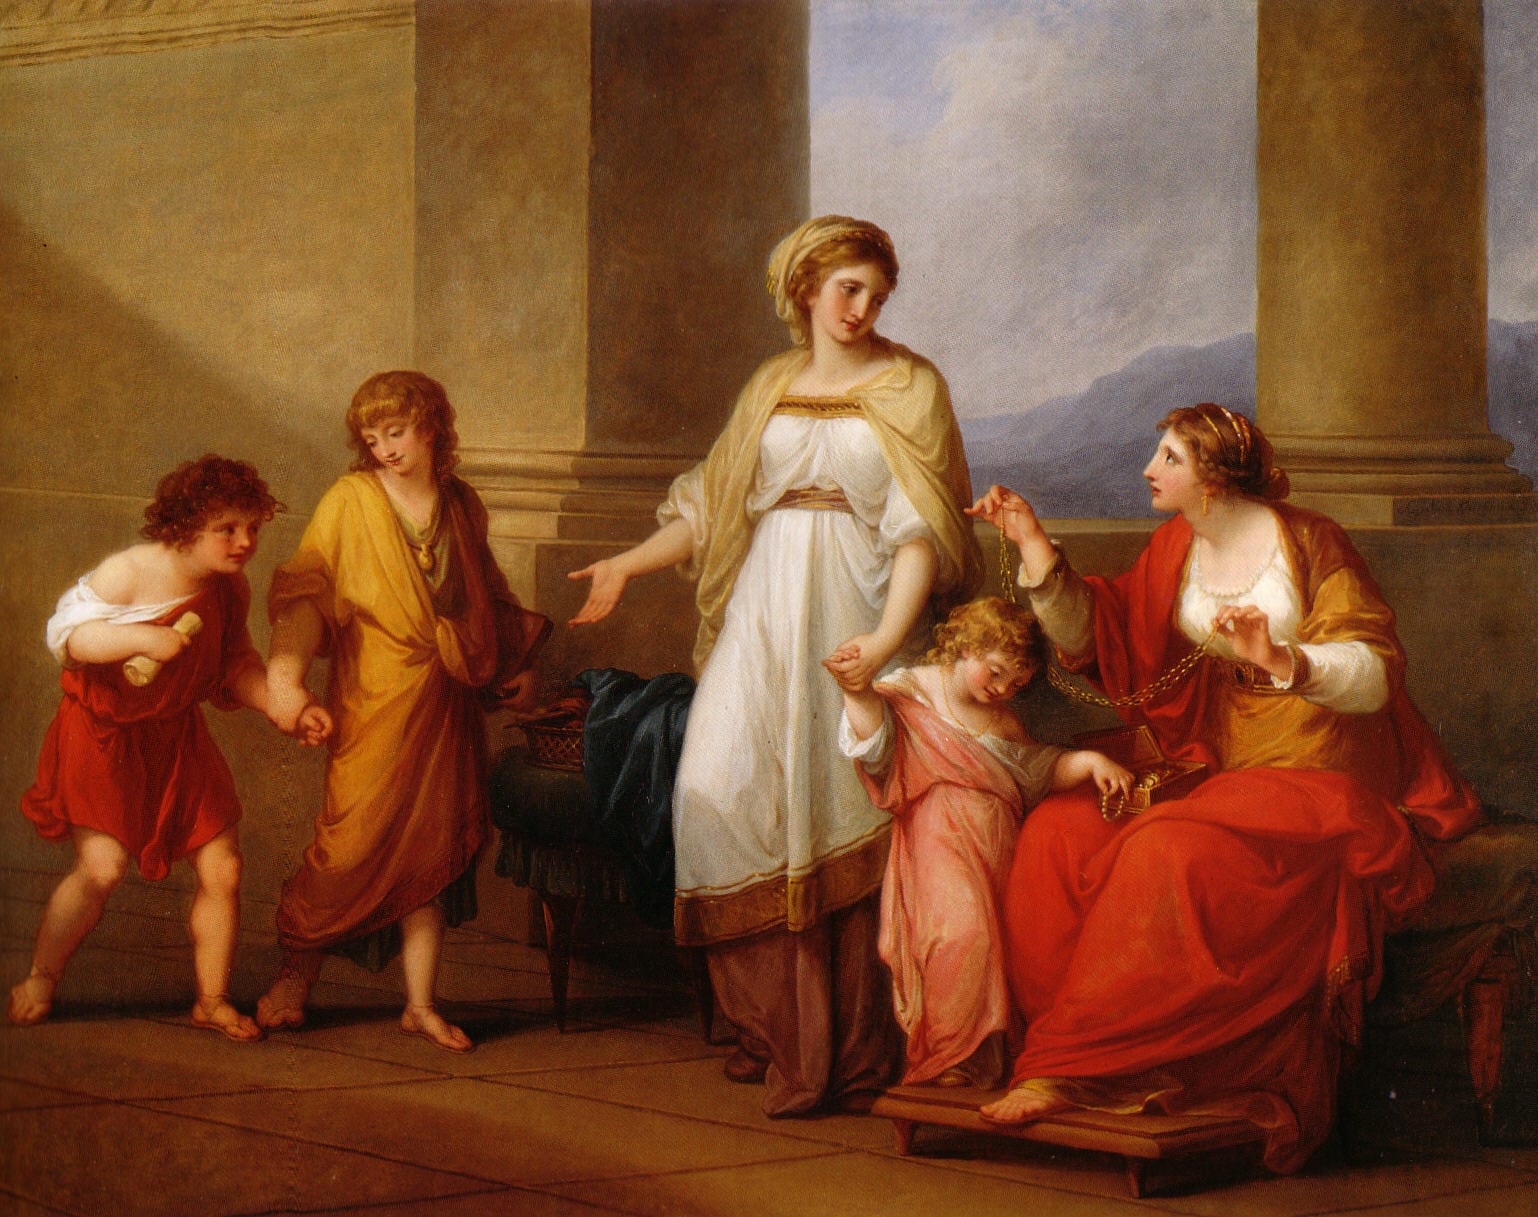 A young Sempronia (in pink) holds the hand of her mother Cornelia (in white). Cornelia, Mother of the Gracchi, Pointing to her Children as Her Treasures, by Angelica Kauffmann (1785, Virginia Museum of Fine Arts)